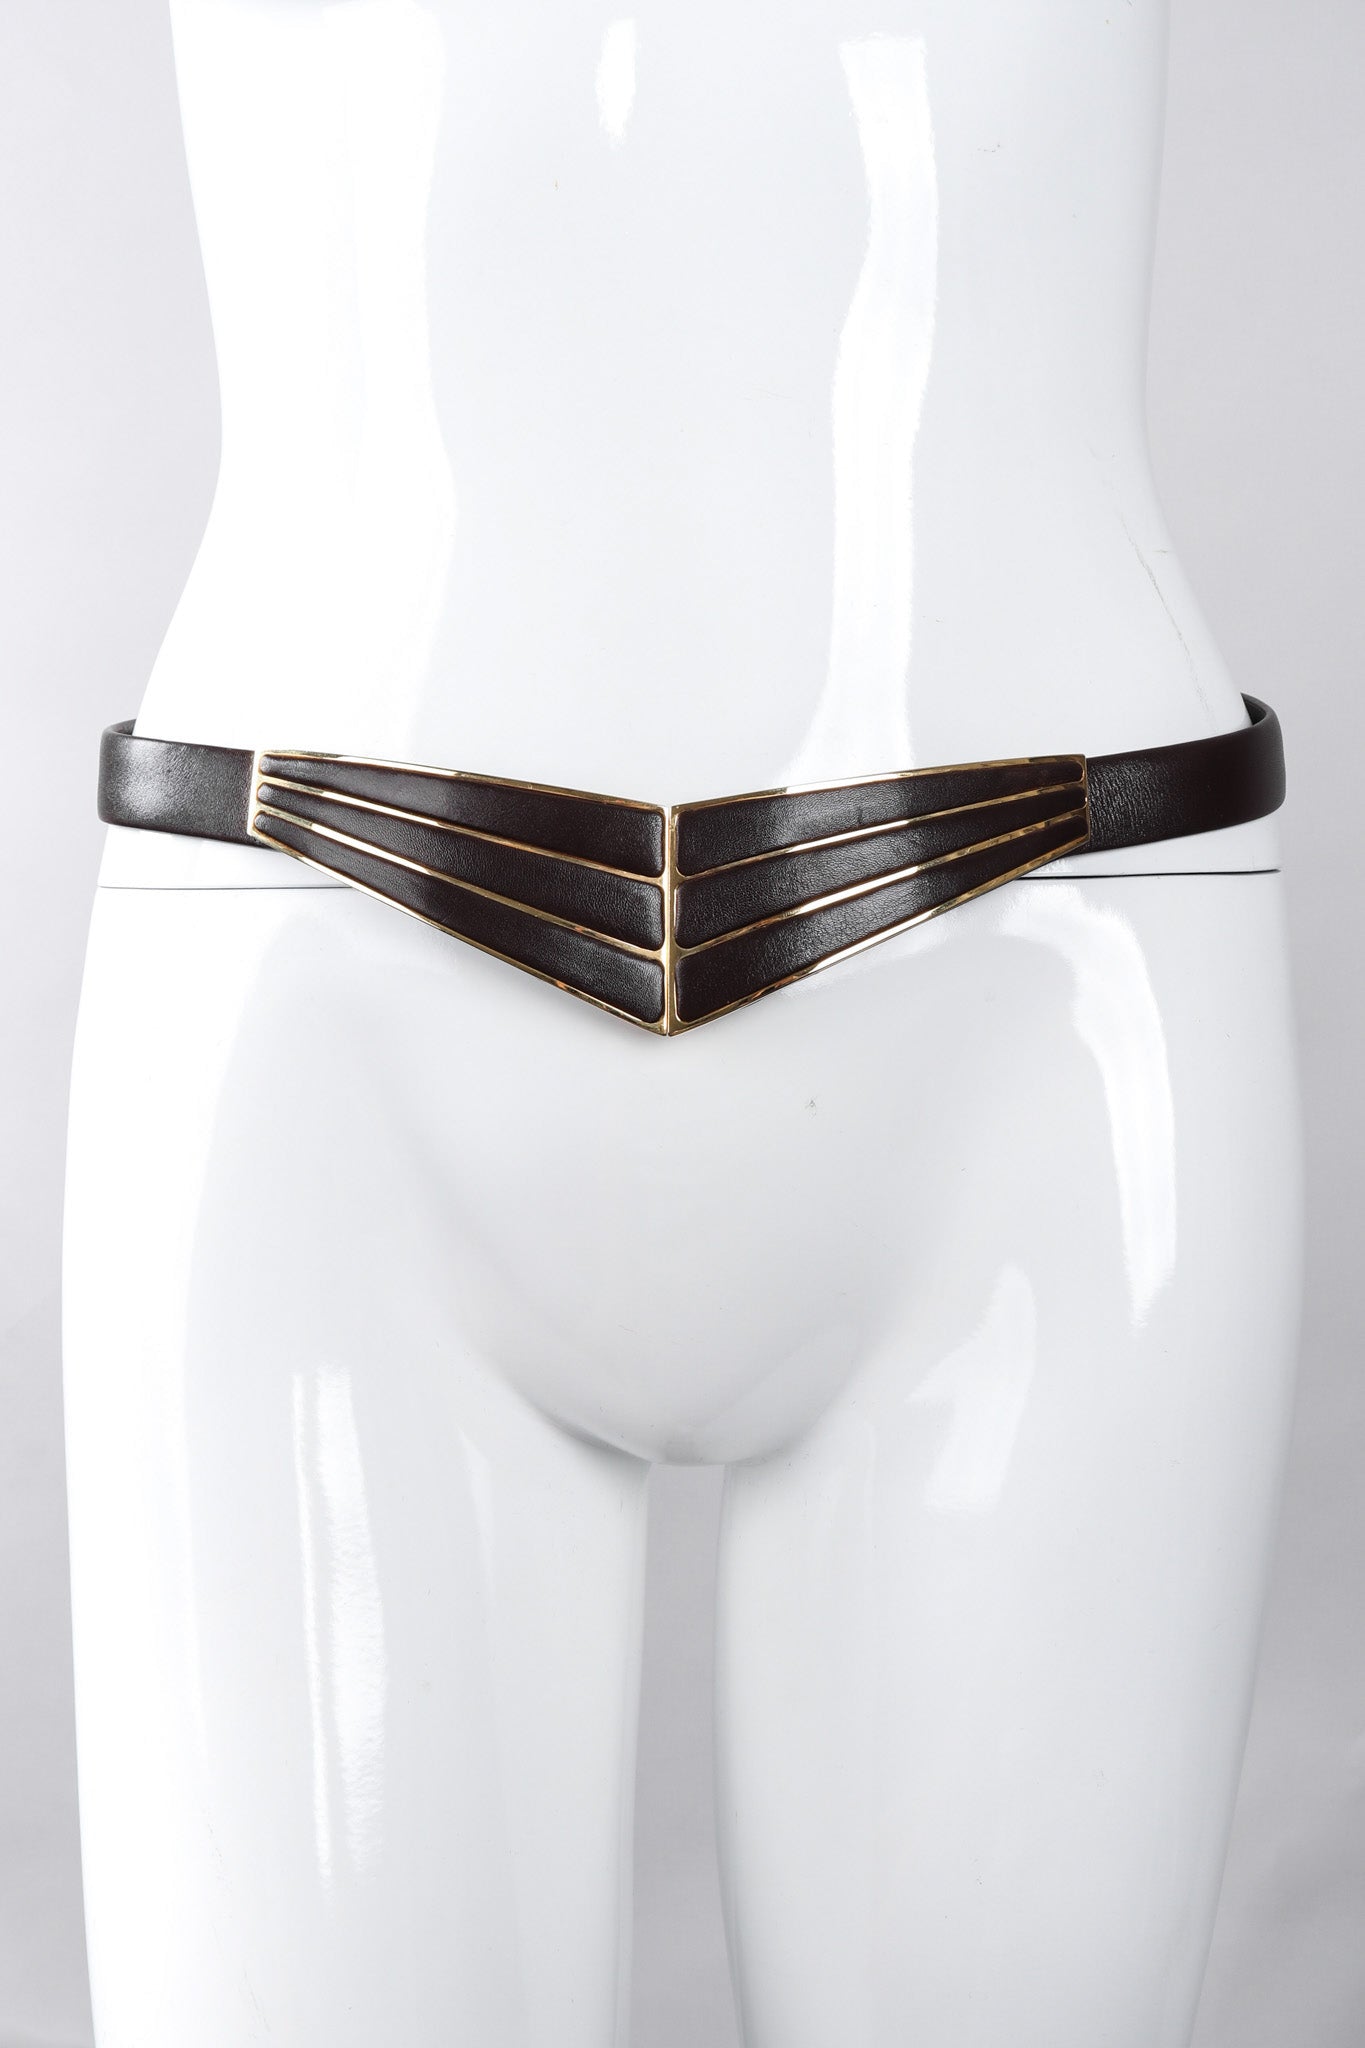 Recess Los Angeles Vintage Judith Leiber Brown Leather Gold V Shaped Buckle